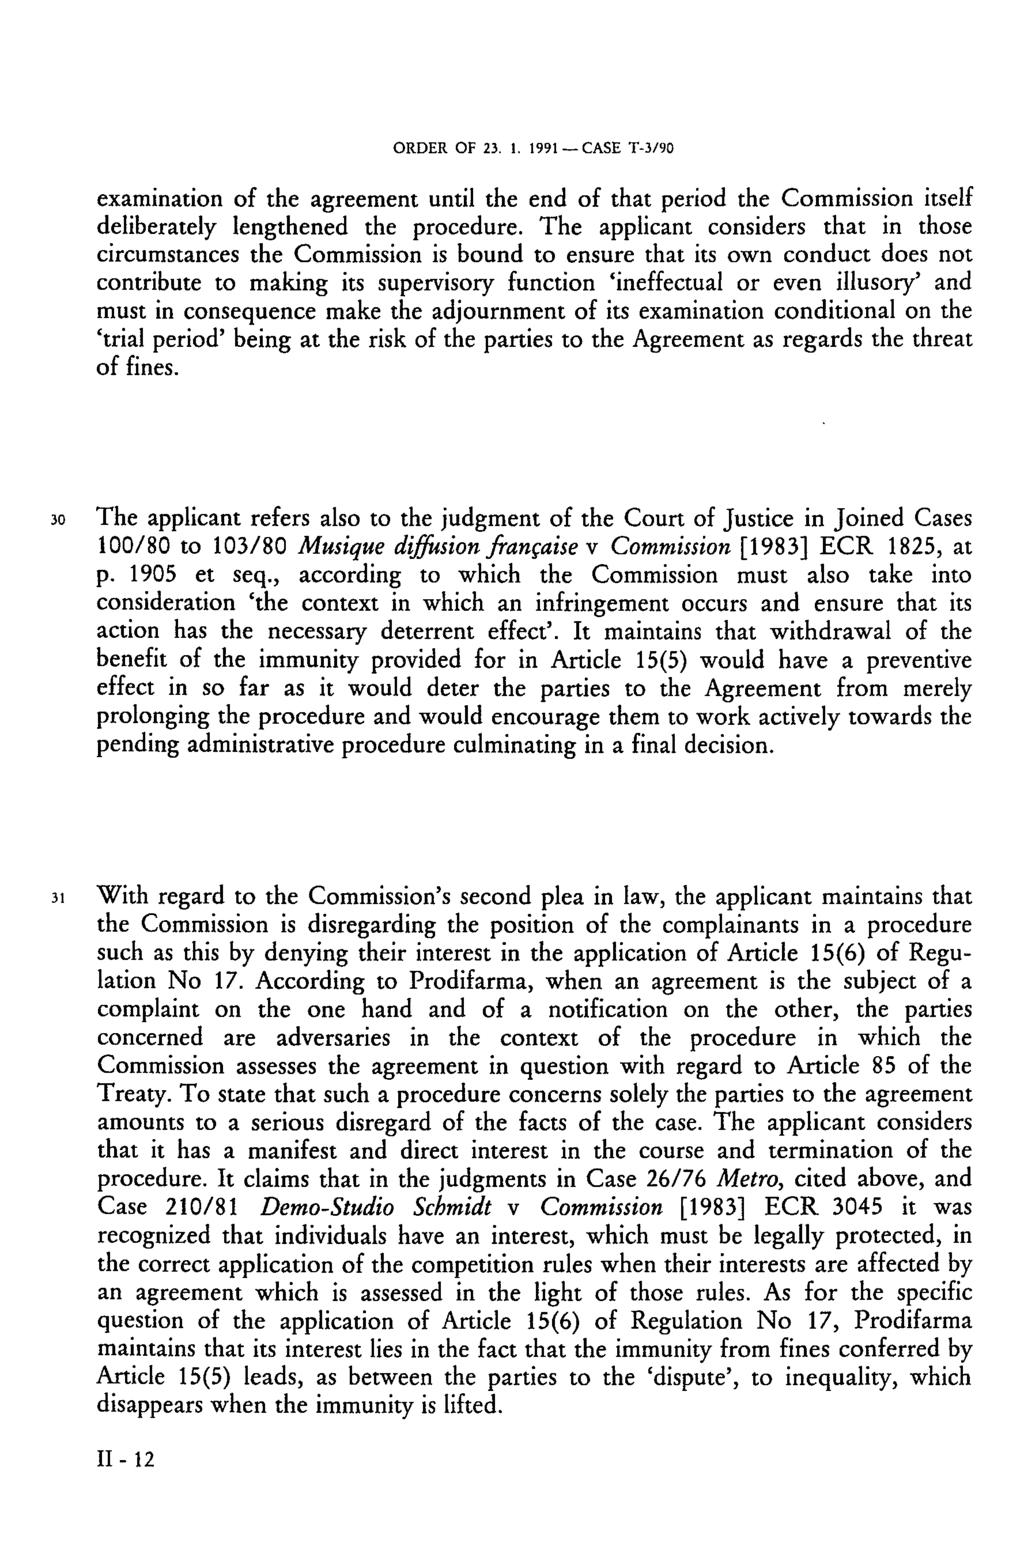 ORDER OF 23. 1. 1991 CASE T-3/90 examination of the agreement until the end of that period the Commission itself deliberately lengthened the procedure.